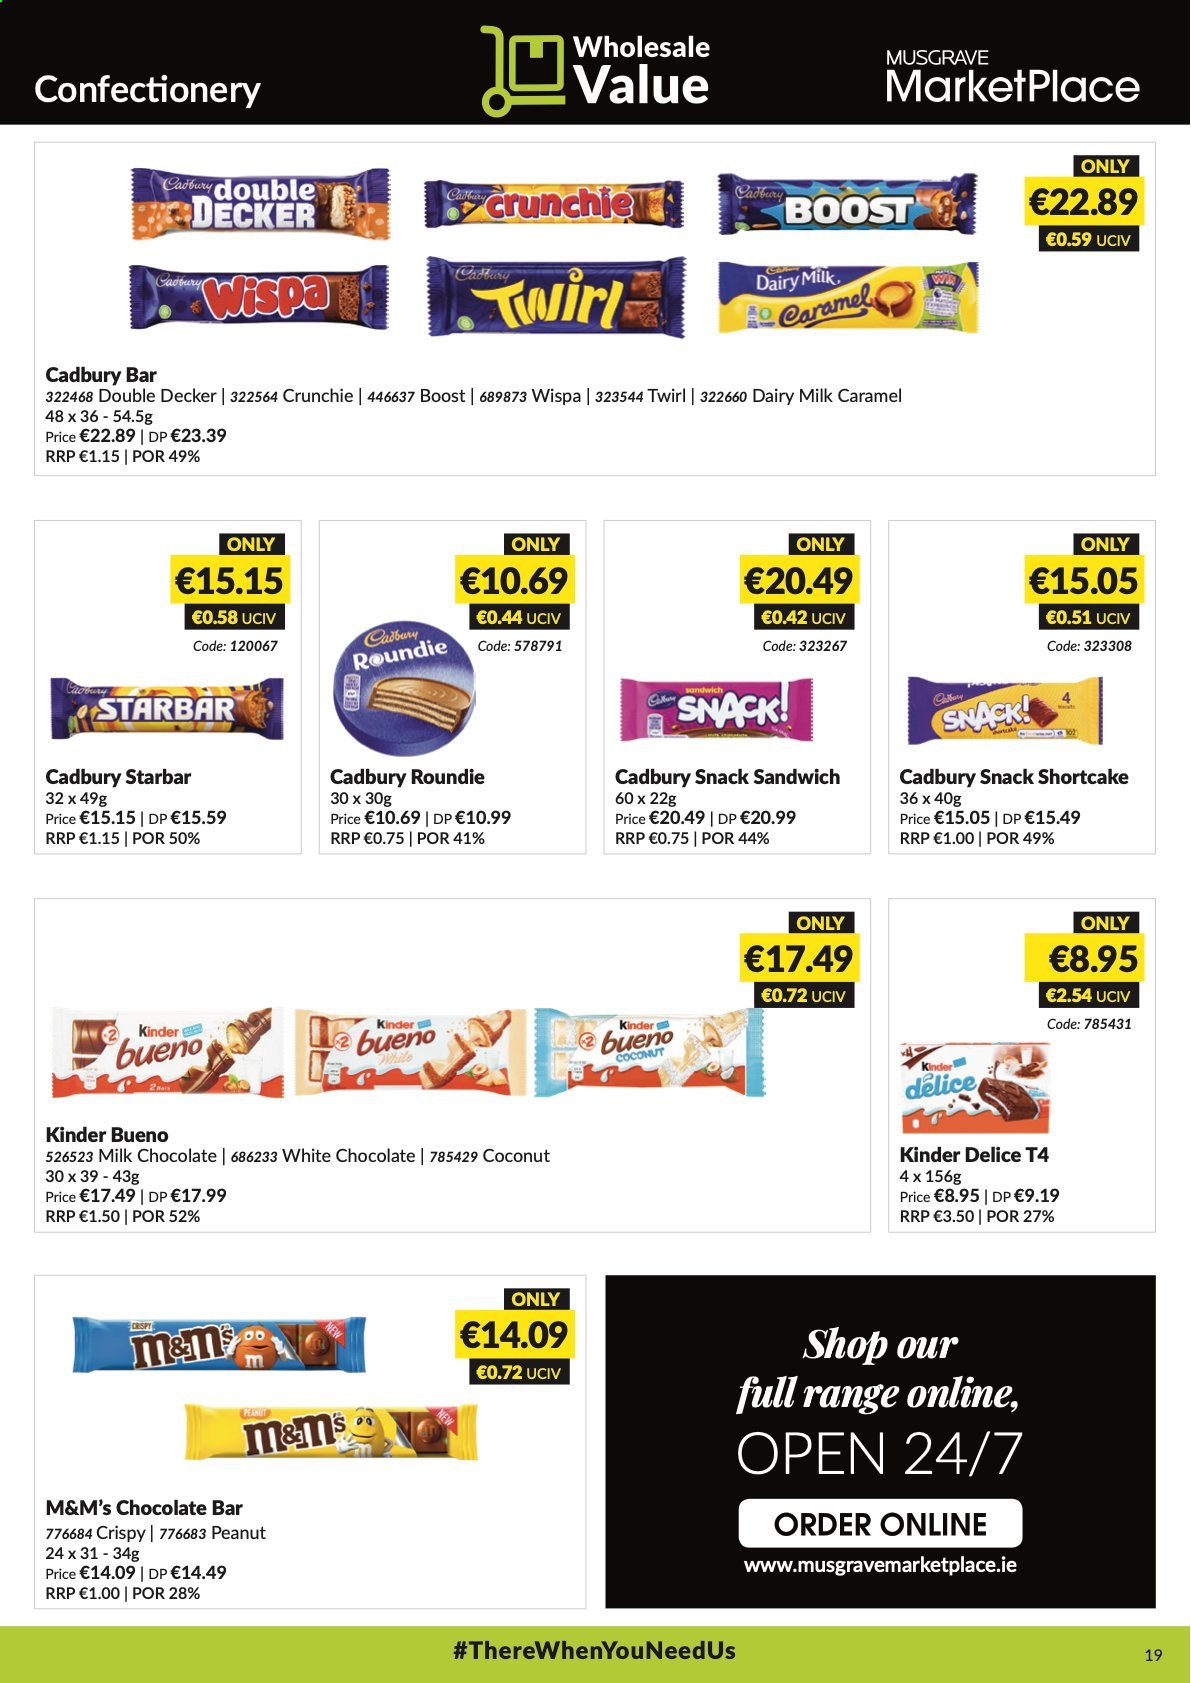 thumbnail - MUSGRAVE Market Place offer  - 06.06.2021 - 03.07.2021 - Sales products - coconut, sandwich, milk chocolate, white chocolate, snack, M&M's, Kinder Bueno, Cadbury, Dairy Milk, chocolate bar, caramel, Boost. Page 19.